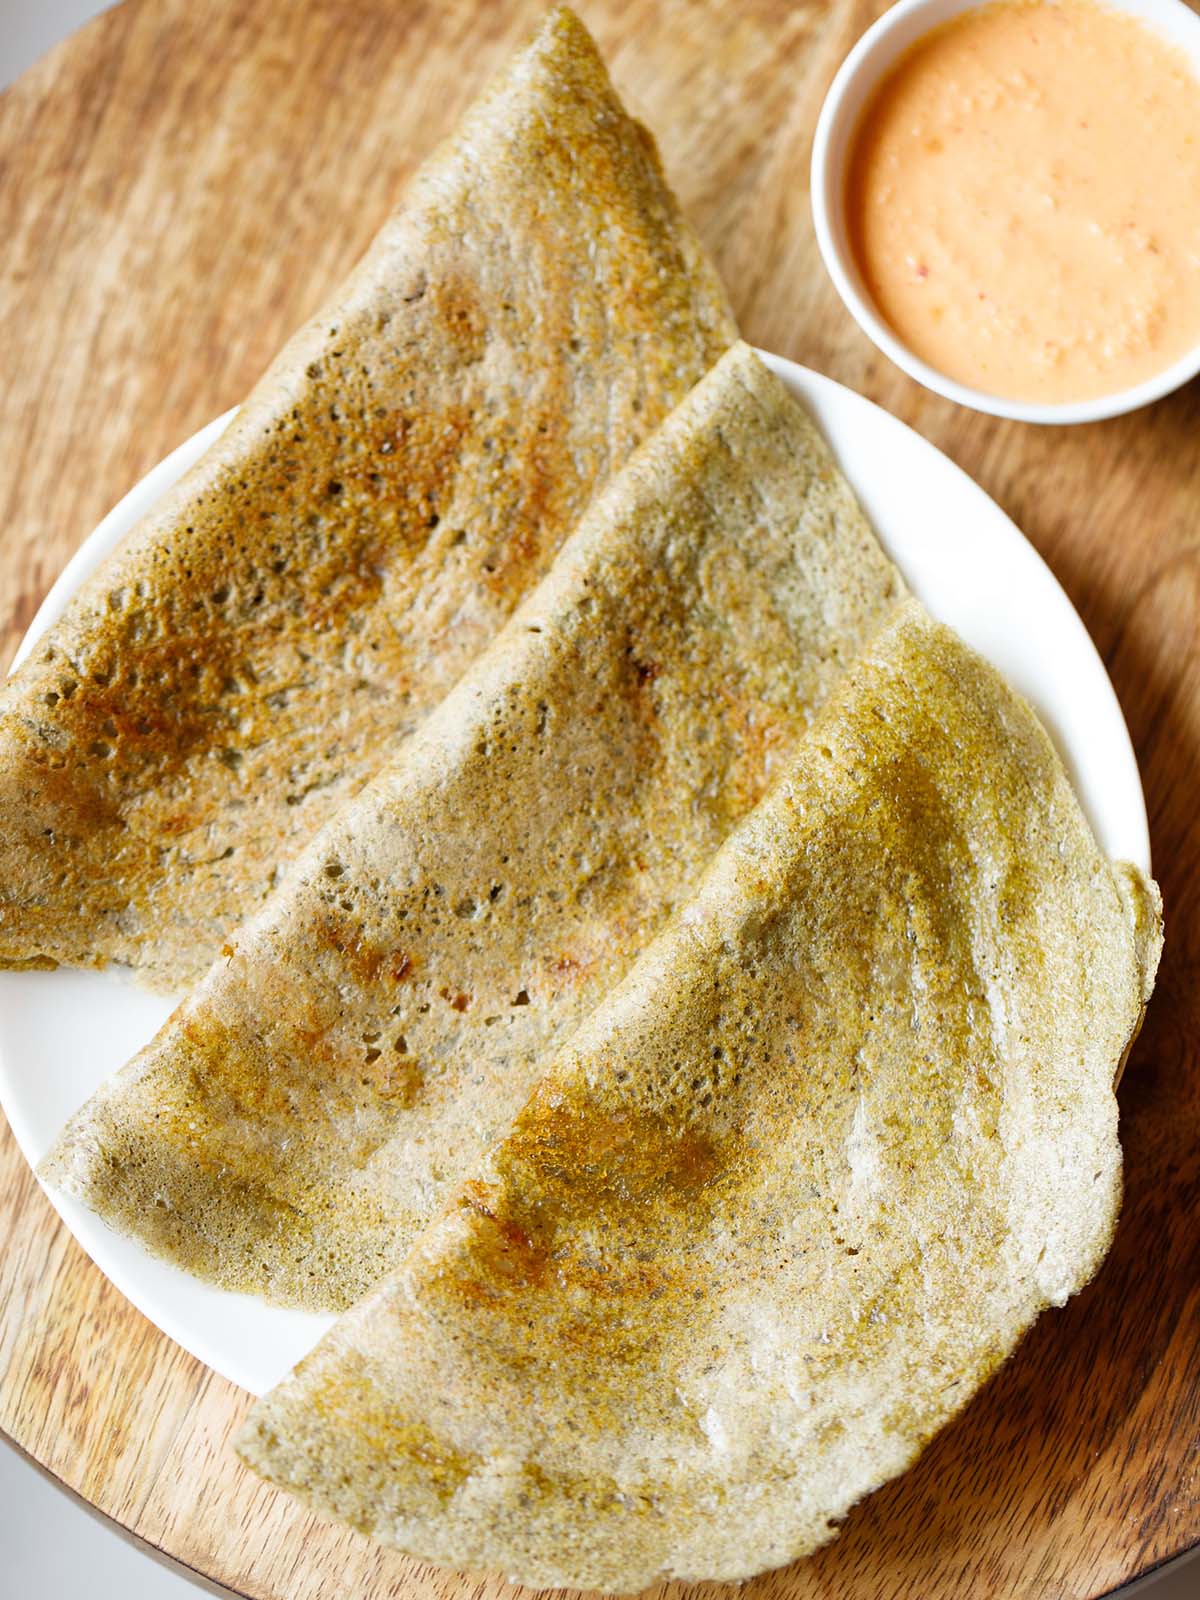 three pesarattu or moong dal dosa folded and kept on a white plate with a orange colored coconut chutney in a side bowl